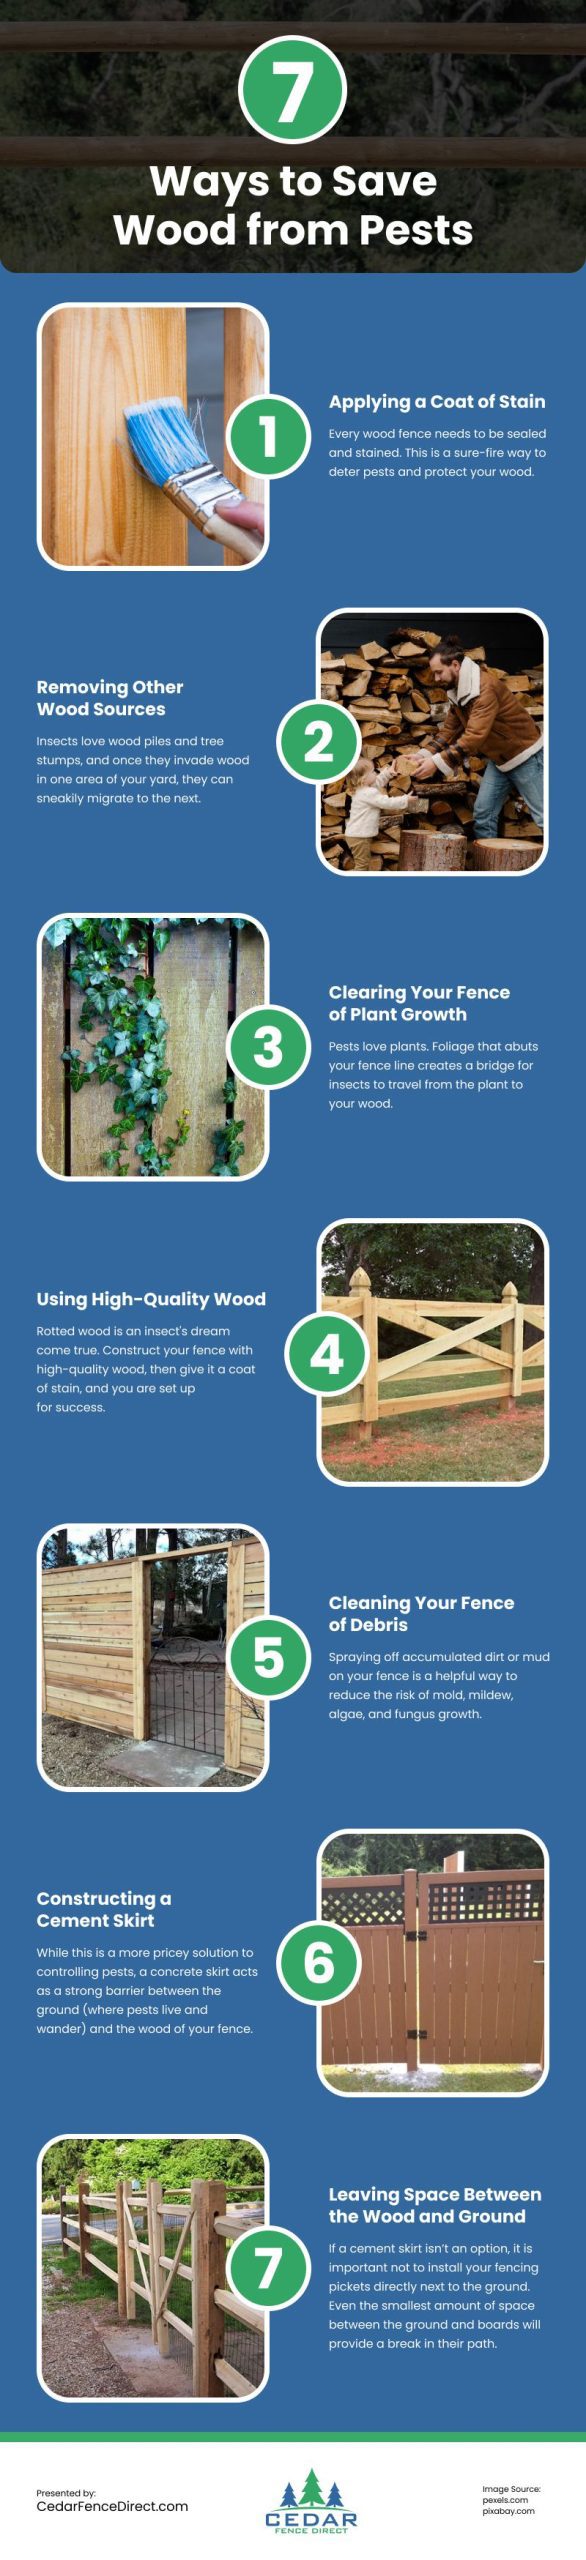 7 Ways to Save Wood from Pests Infographic